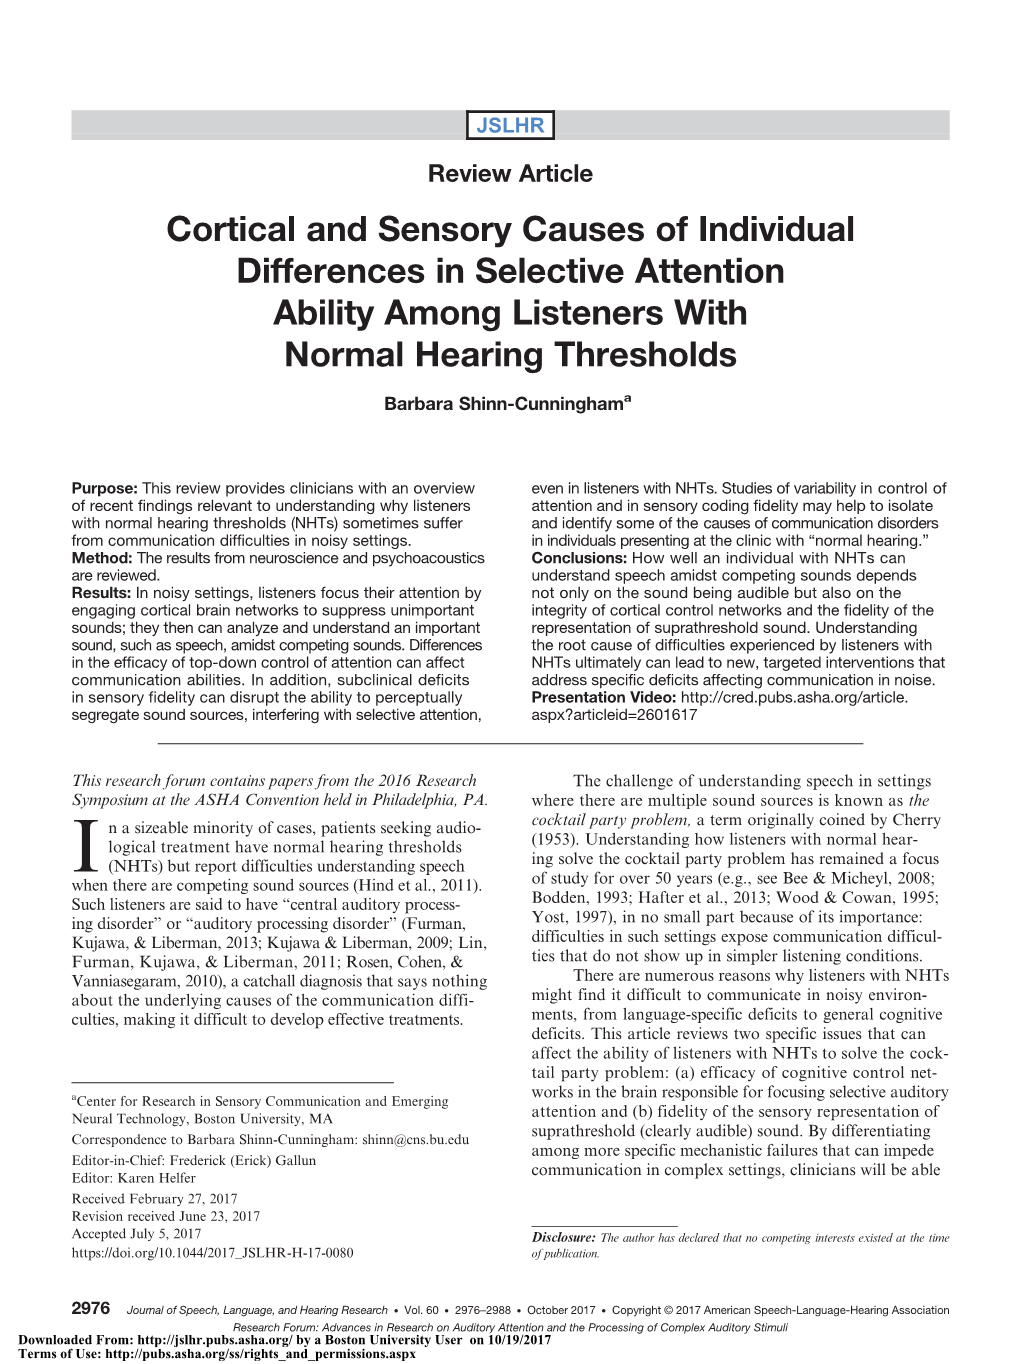 Cortical and Sensory Causes of Individual Differences in Selective Attention Ability Among Listeners with Normal Hearing Thresholds